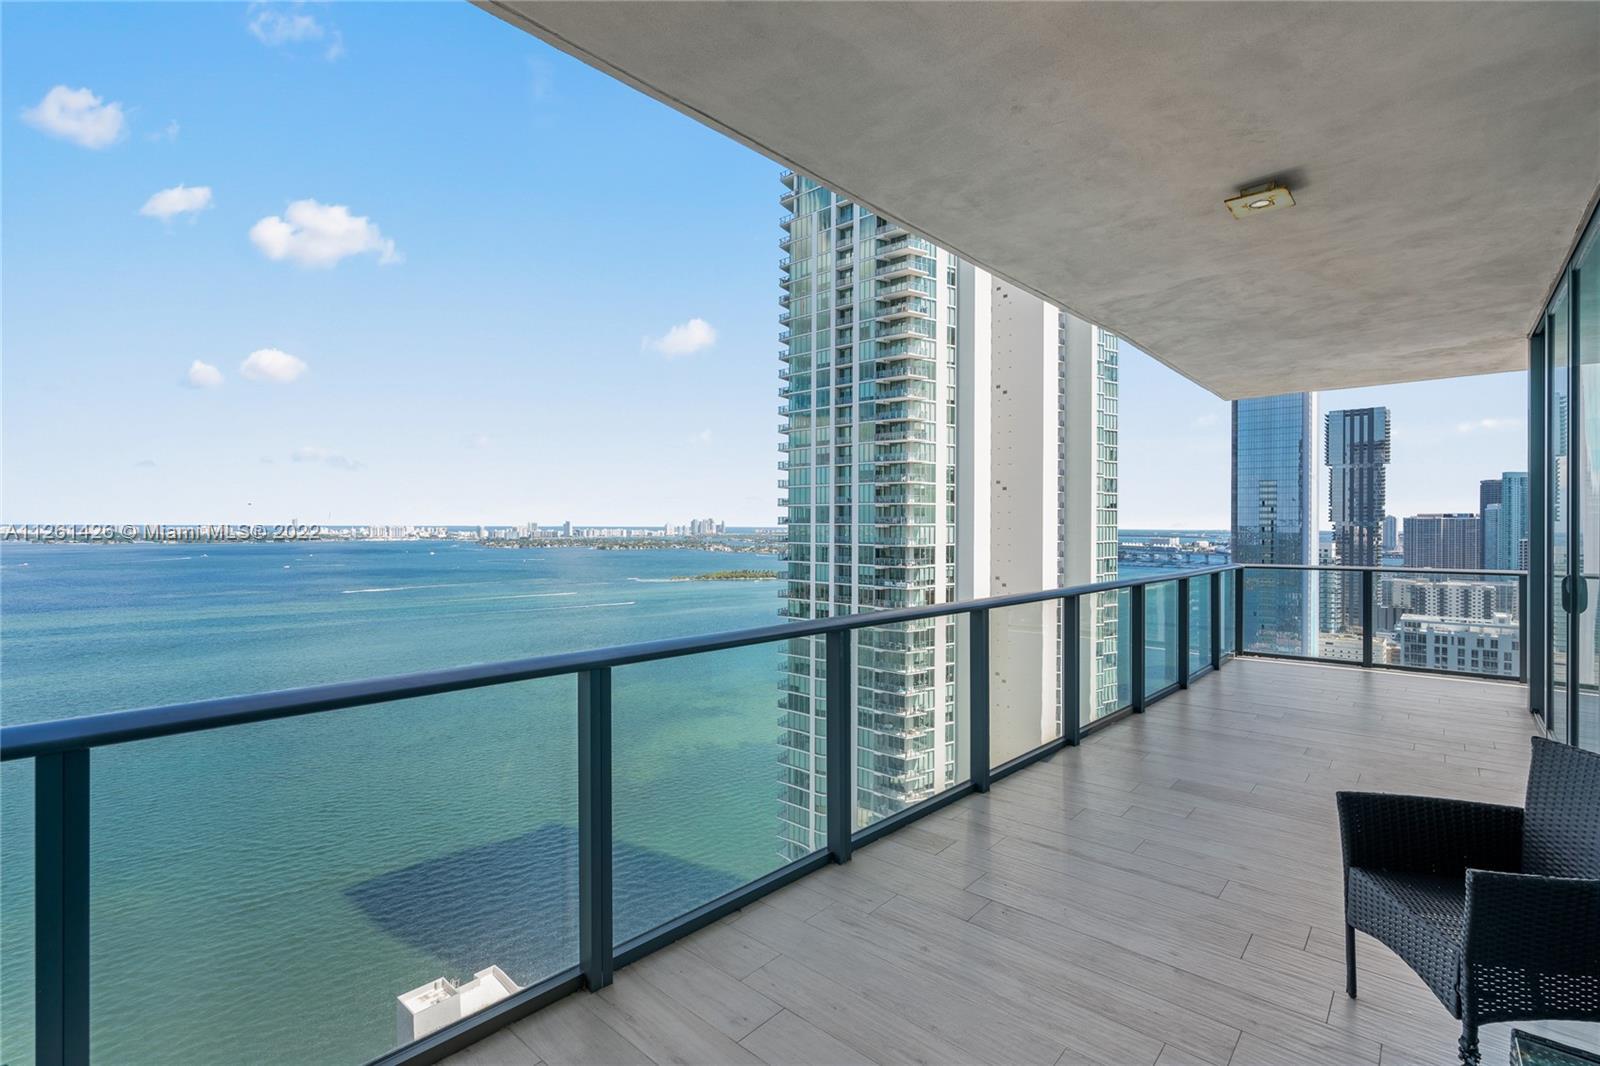 Get ready to enjoy breathtaking sunrises and sunsets from the 30th floor of this stunning corner hom